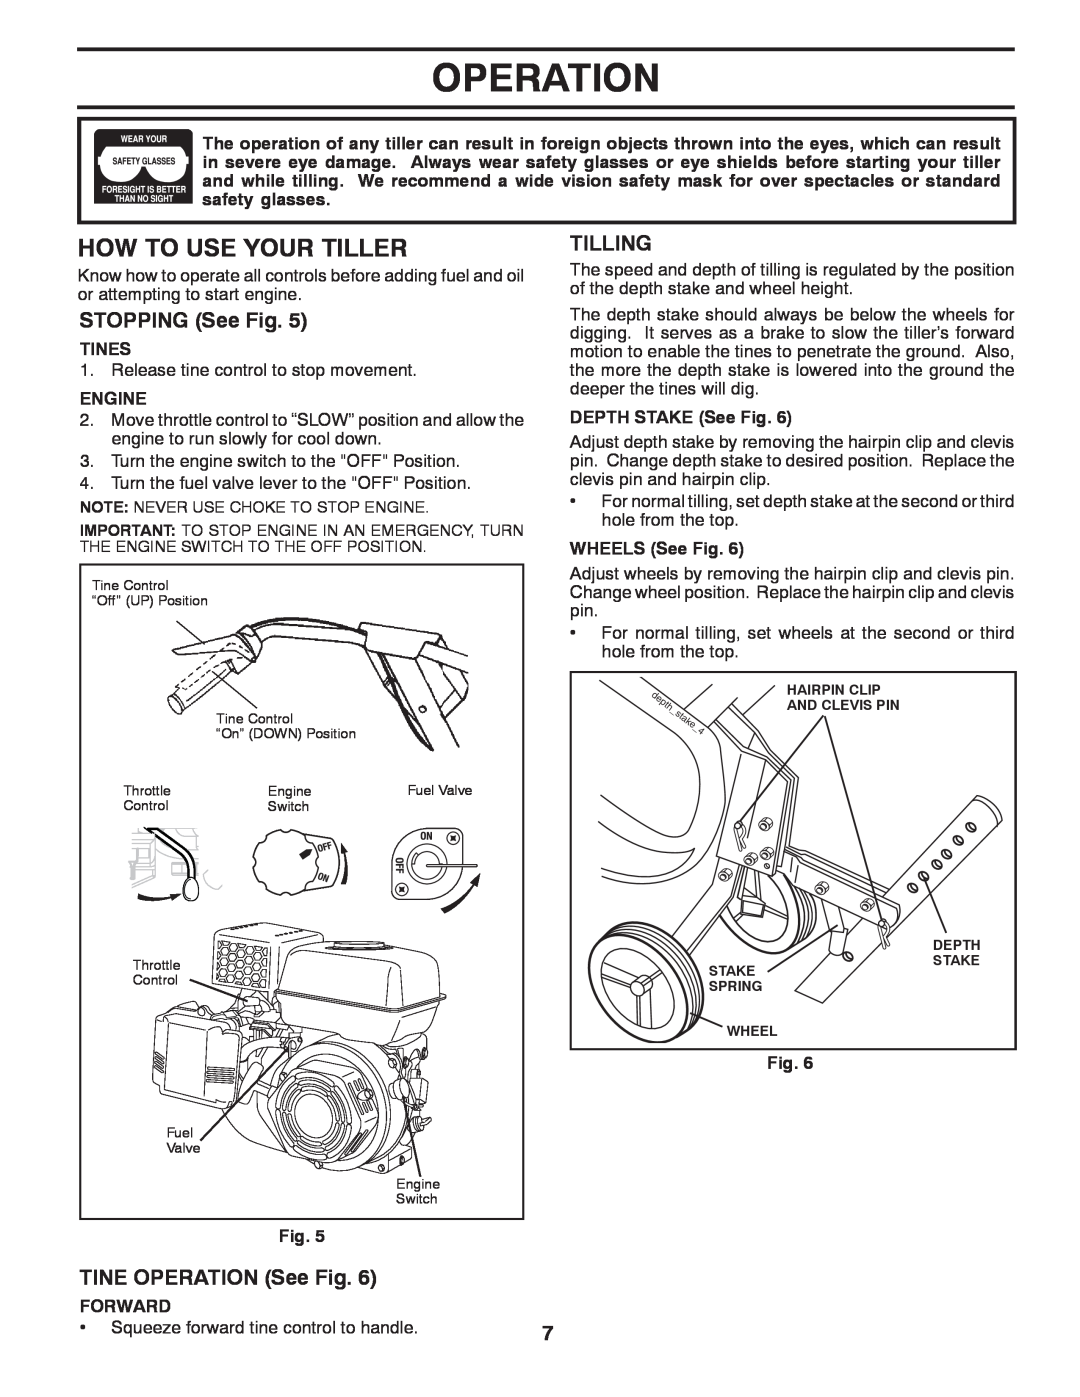 McCulloch 96083000400 How To Use Your Tiller, Operation, STOPPING See Fig, TINE OPERATION See Fig, Tilling, Tines, Engine 